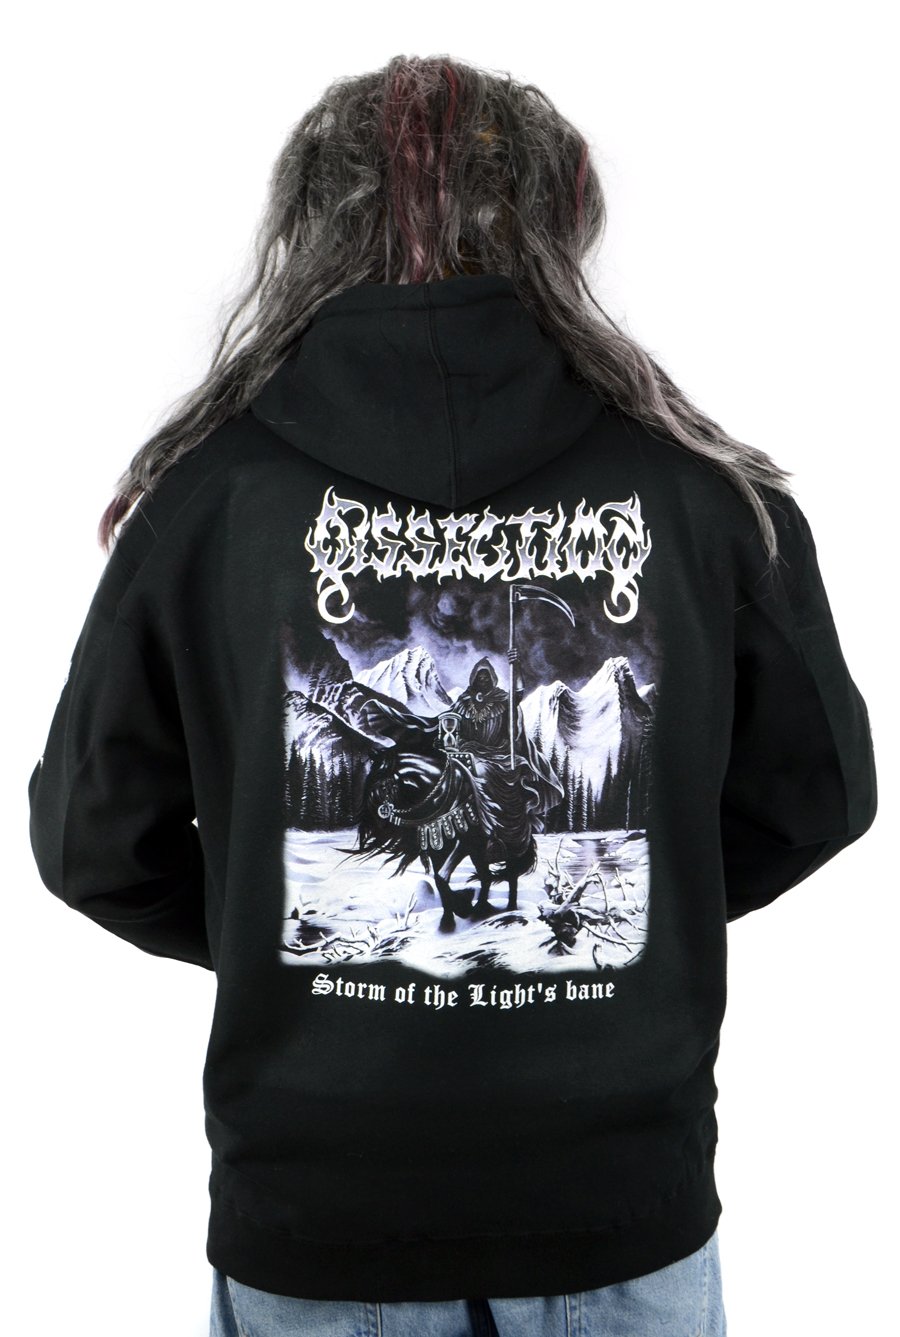 DISSECTION - Storm Of The Light's Bane (Zip-Up Hooded Sweat Shirt)